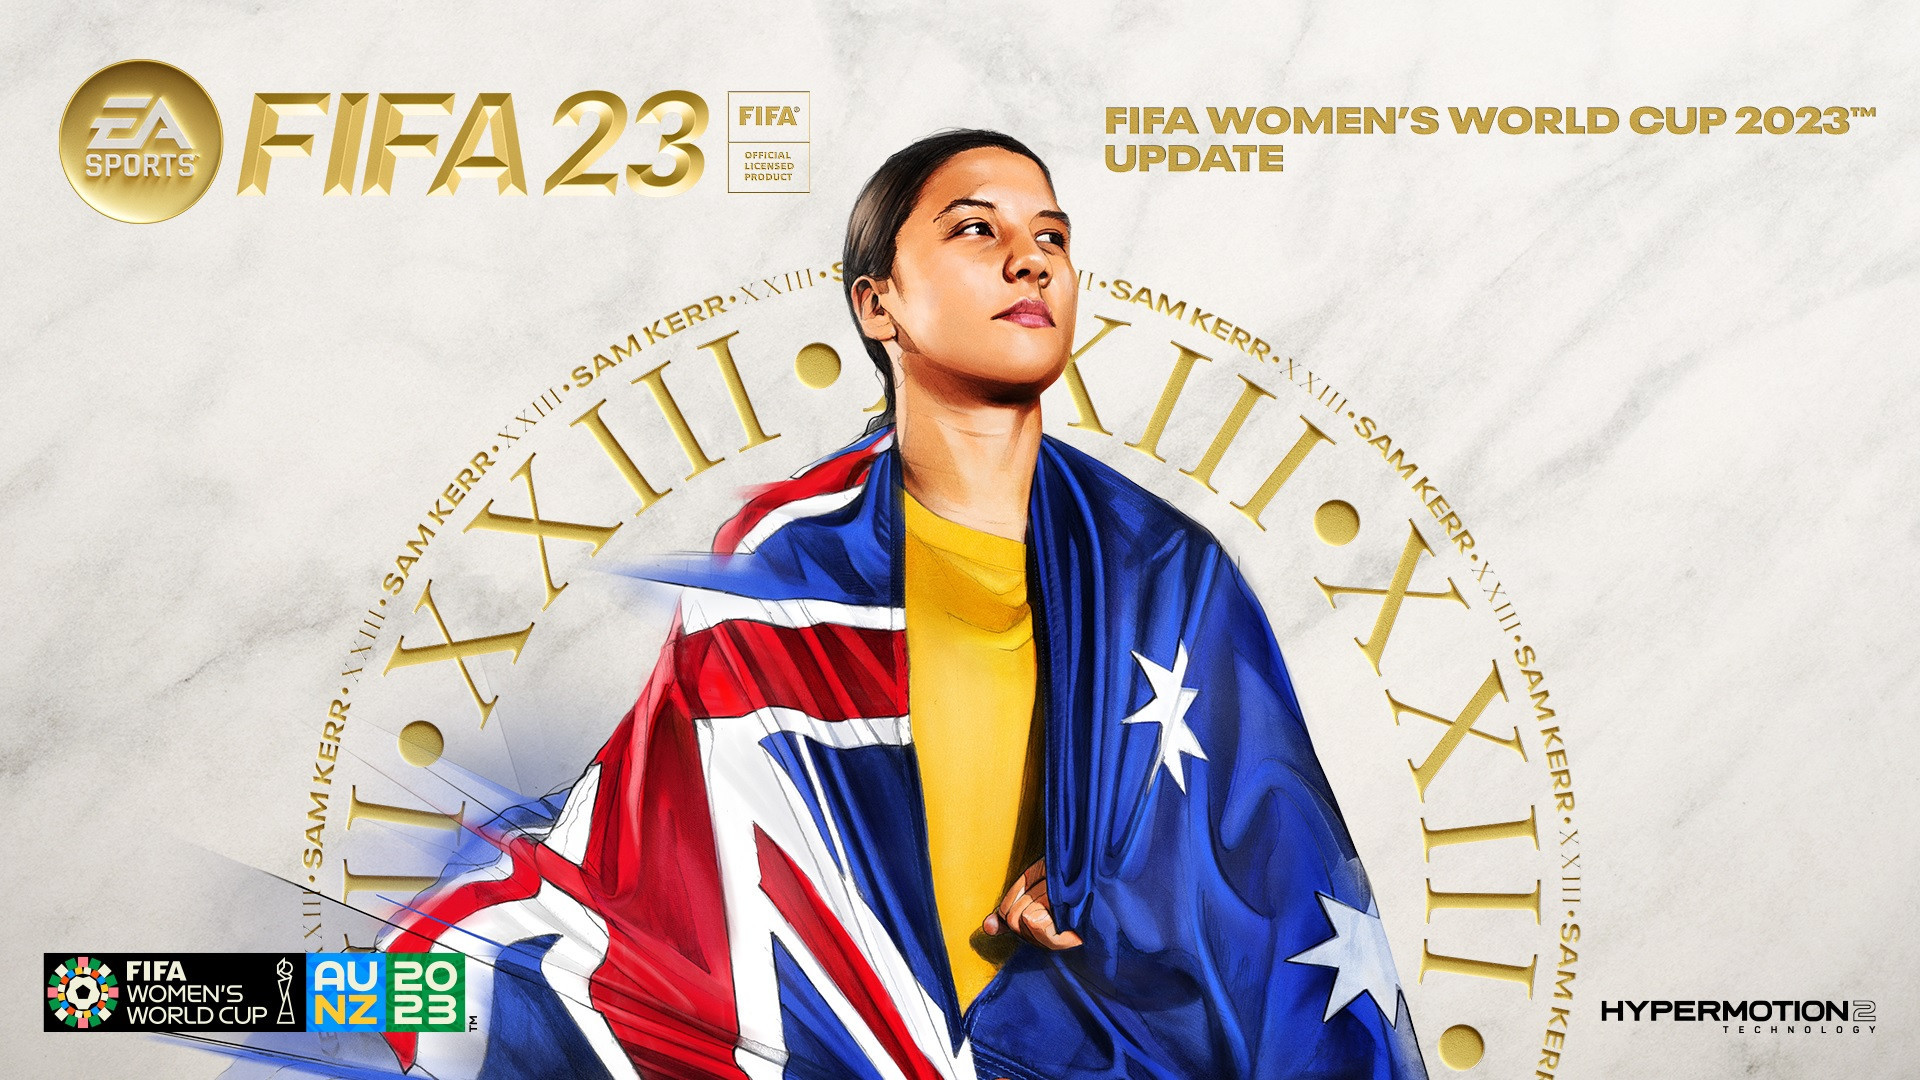 Women’s World Cup available to play on video game FIFA 23